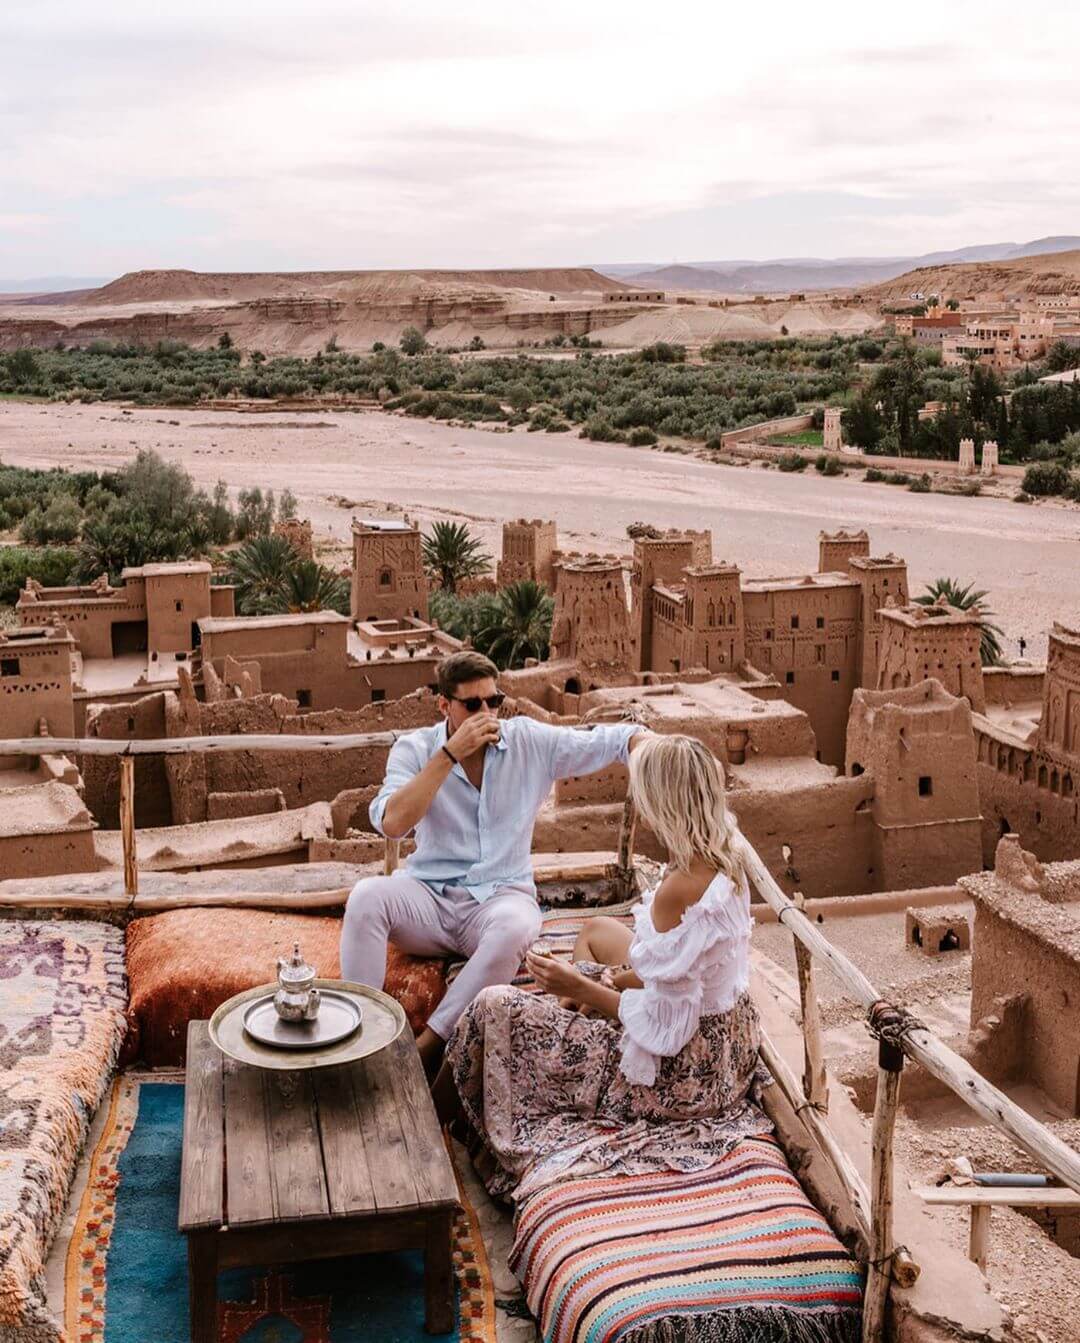 Ait Ben Haddou hotels and accommodations